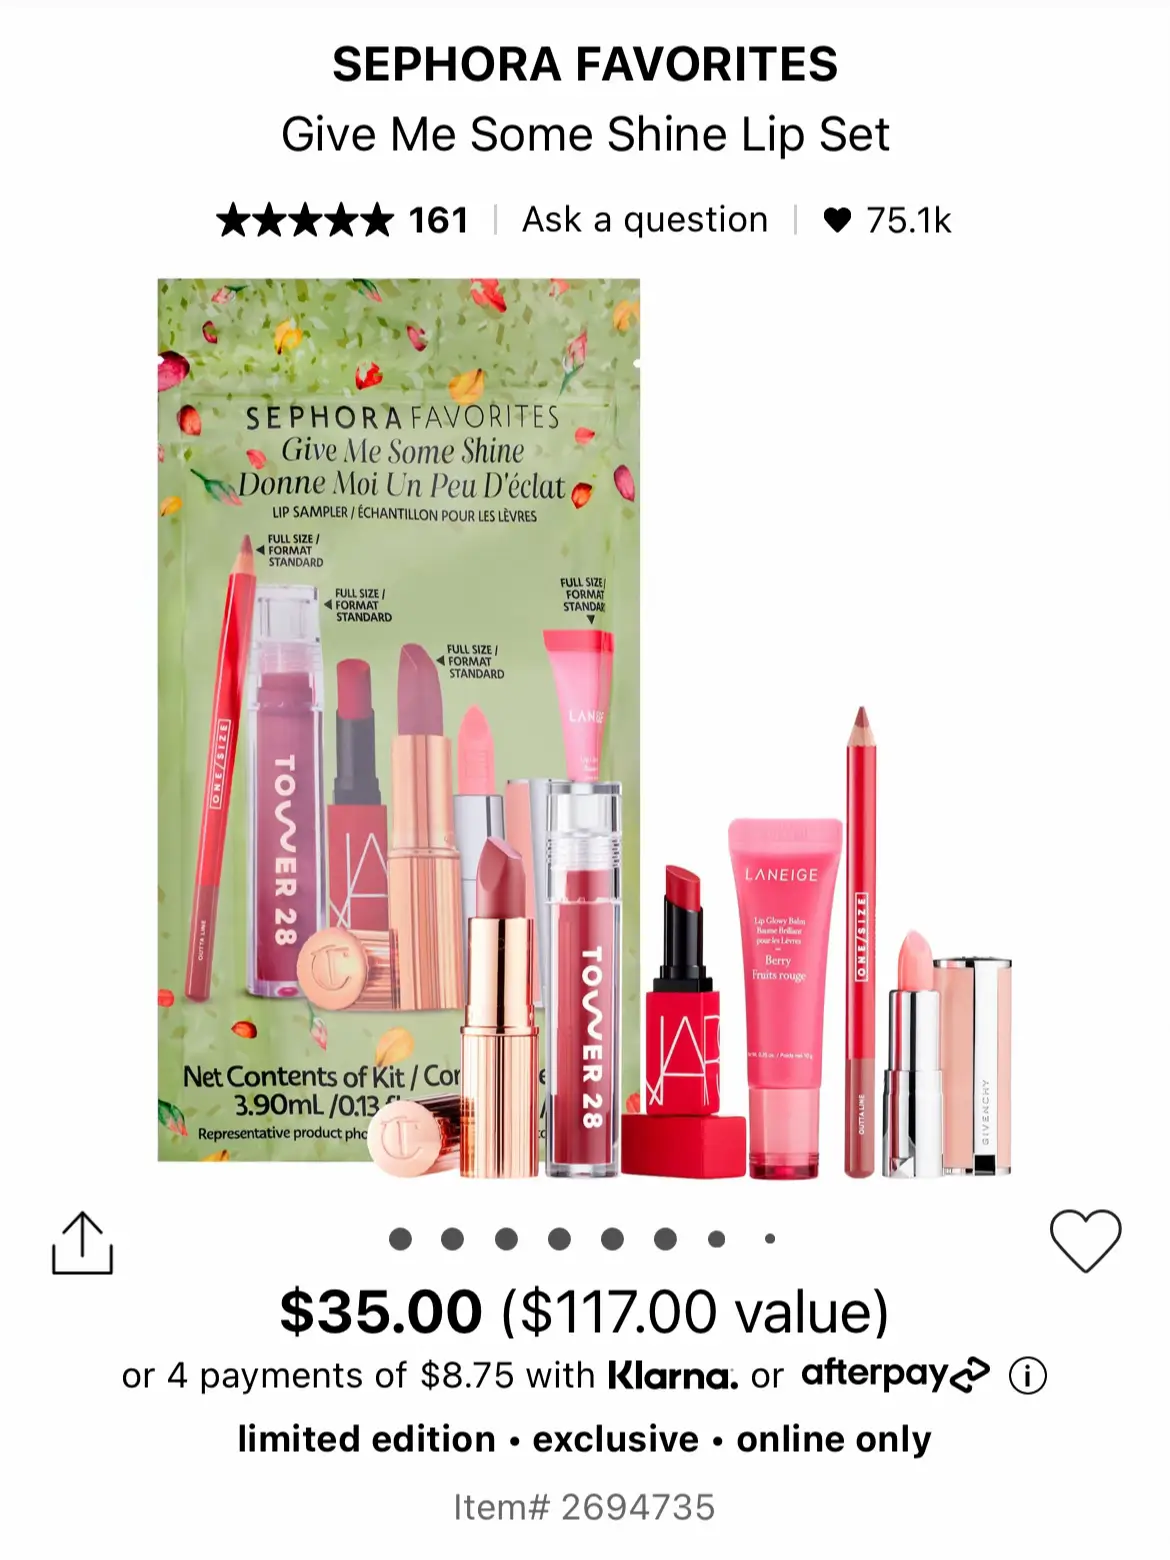 20 top sephora favorites give me some shine set ideas in 2024